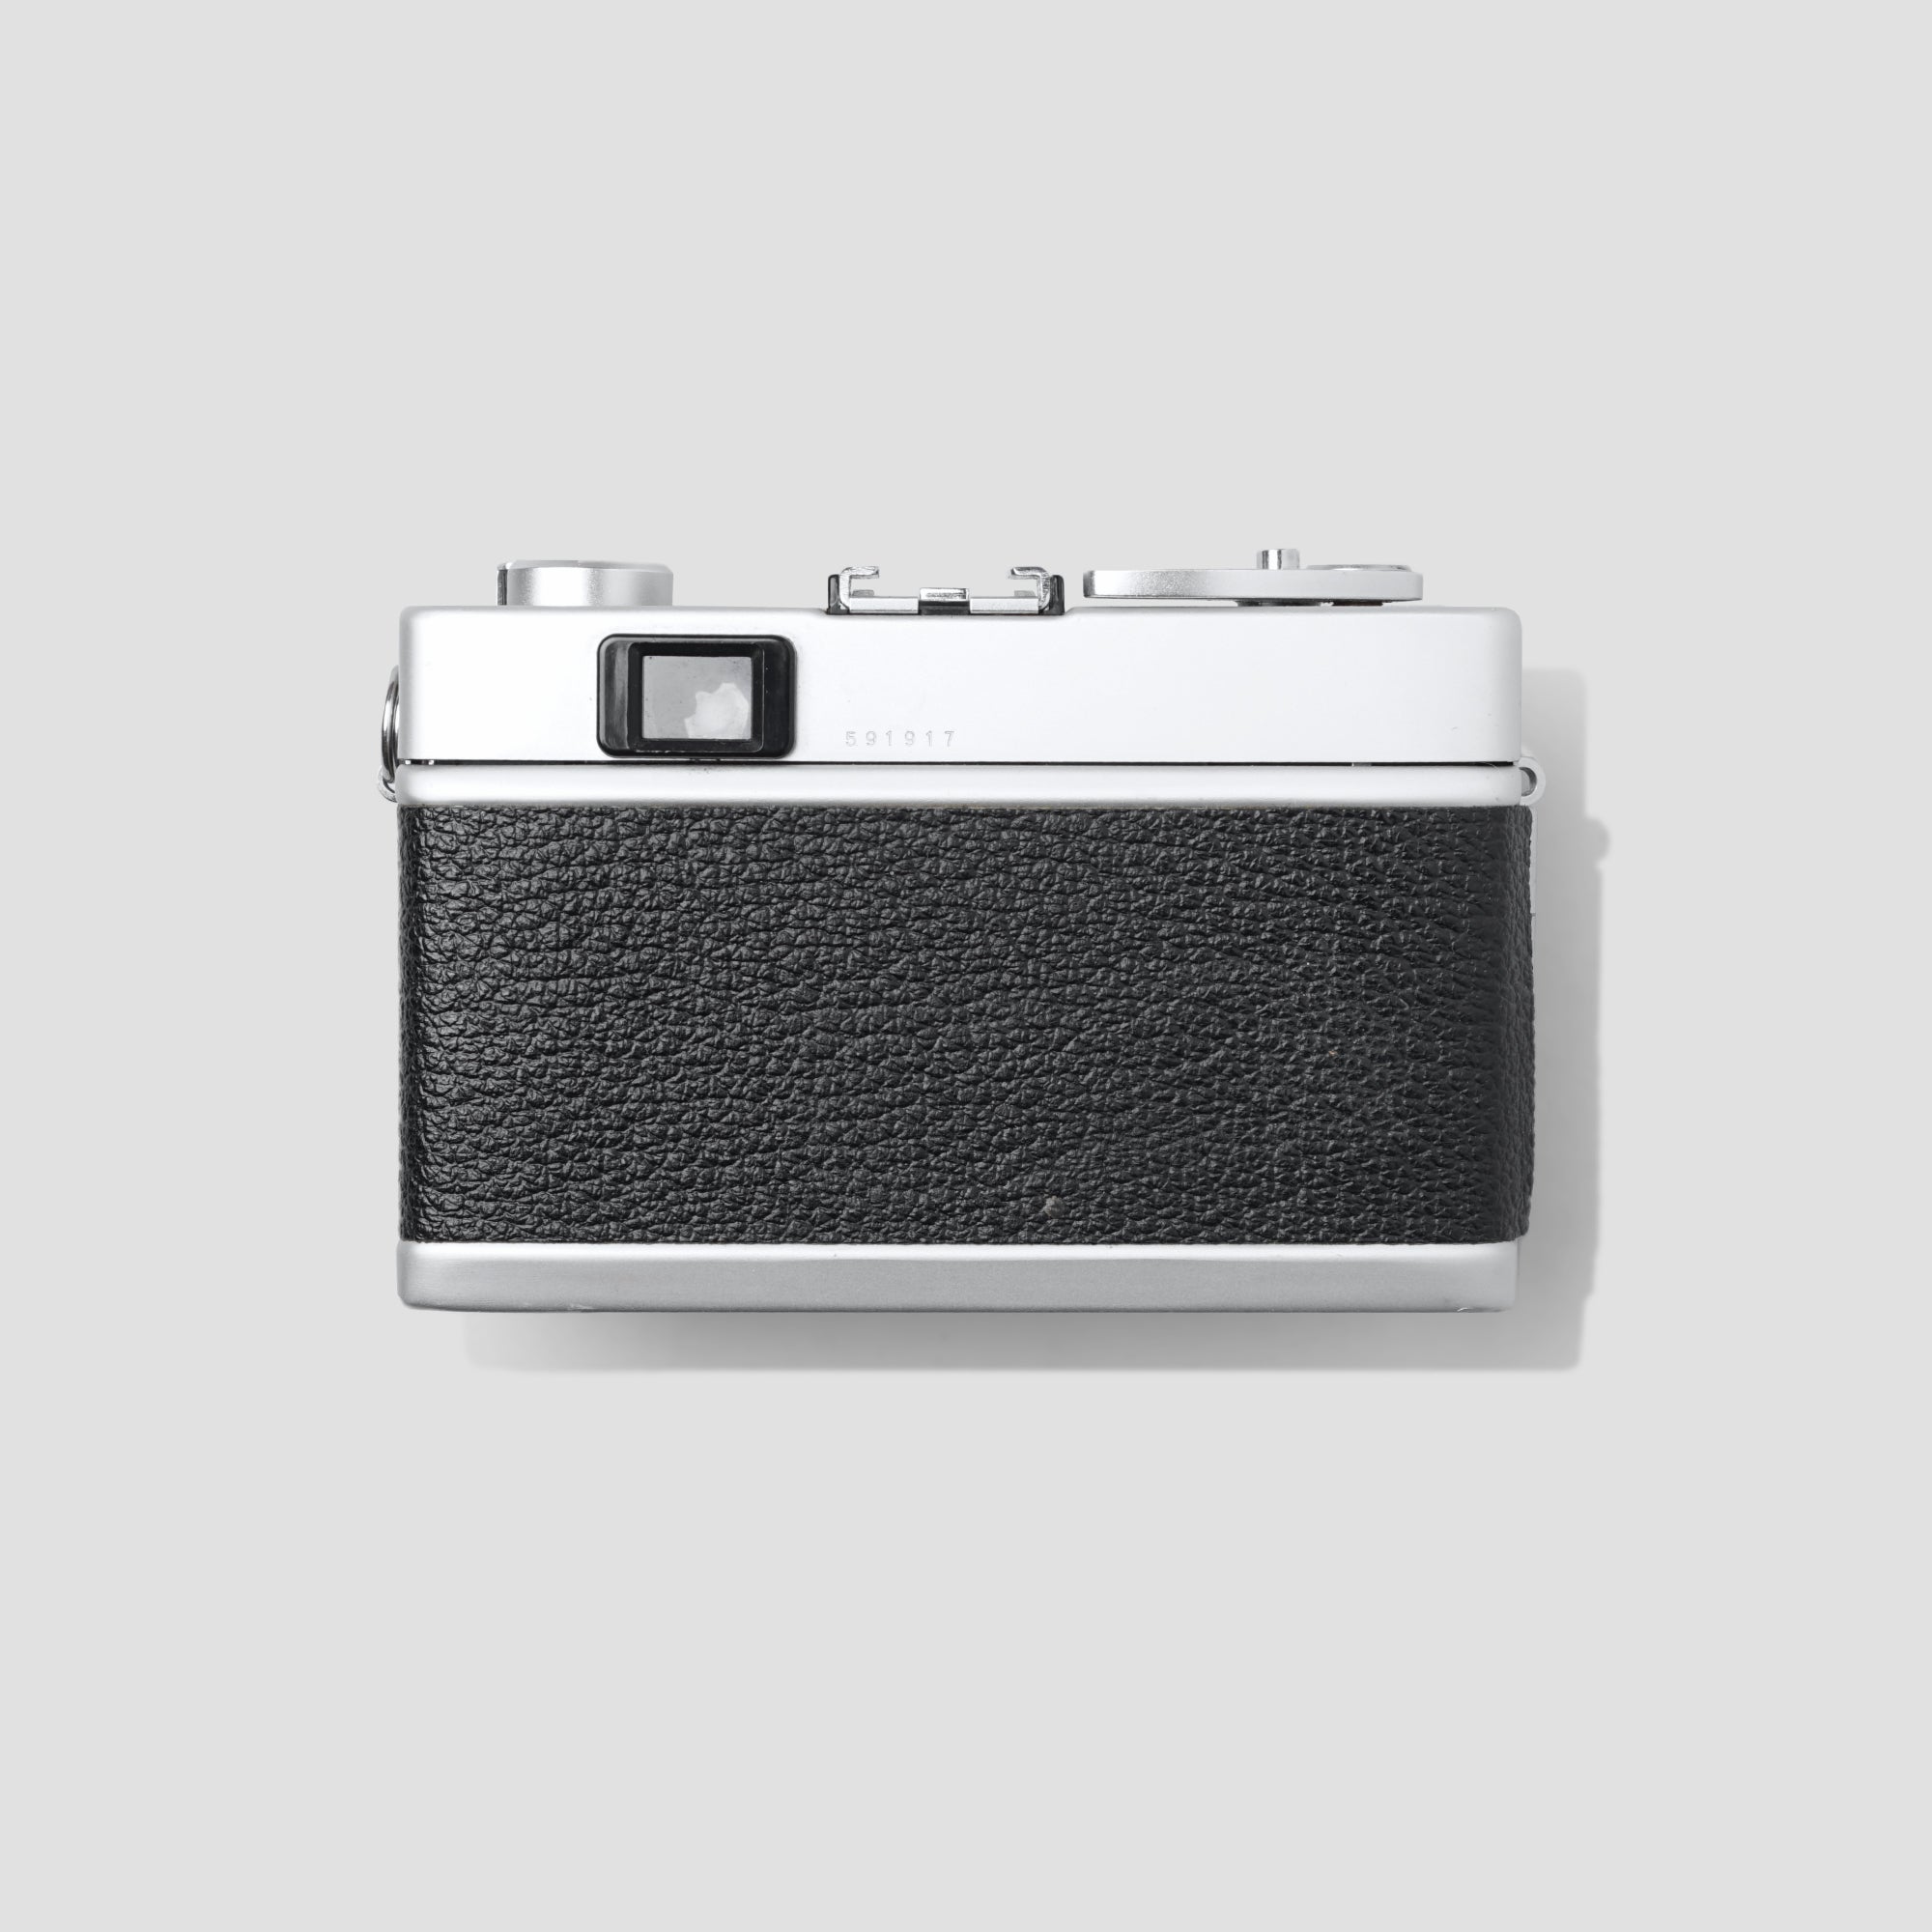 Buy Konica C35 now at Analogue Amsterdam